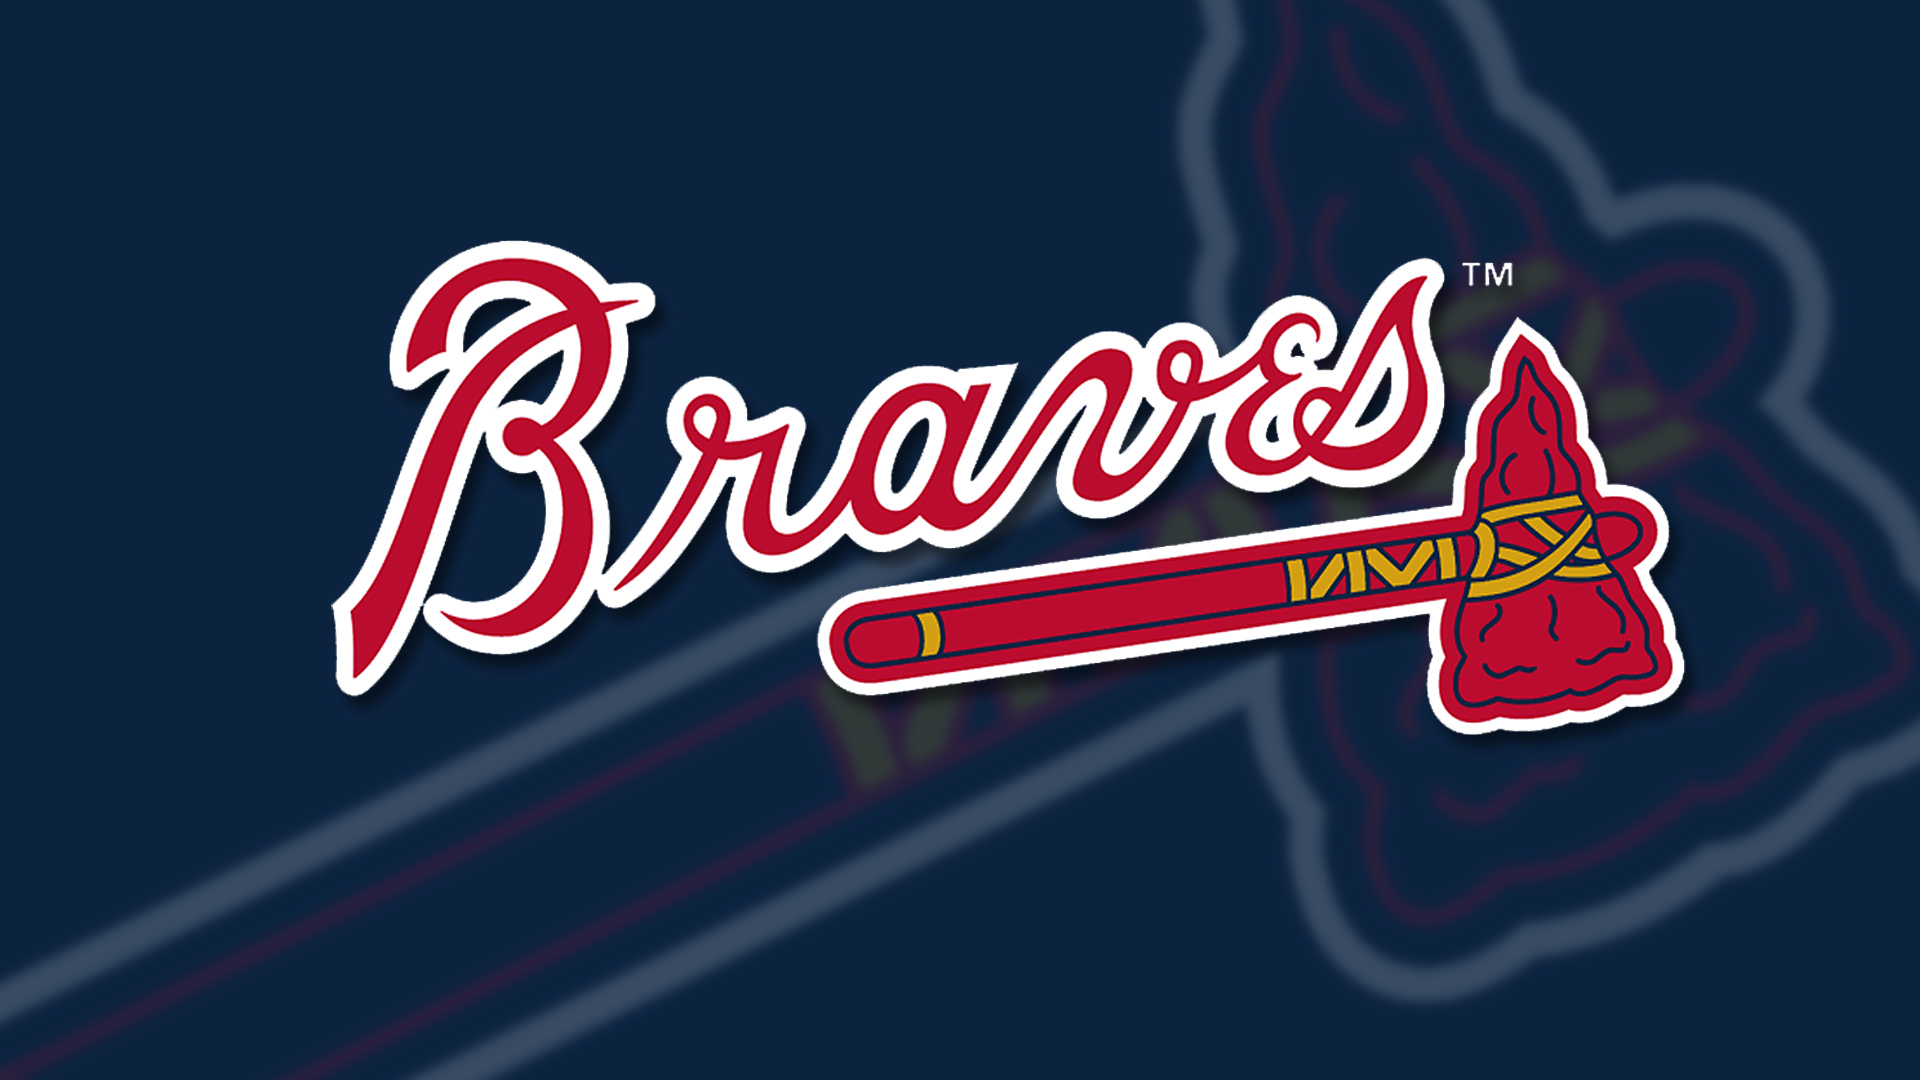 Rosario hits for cycle, leads Fried, Braves over Giants 3-0 - The